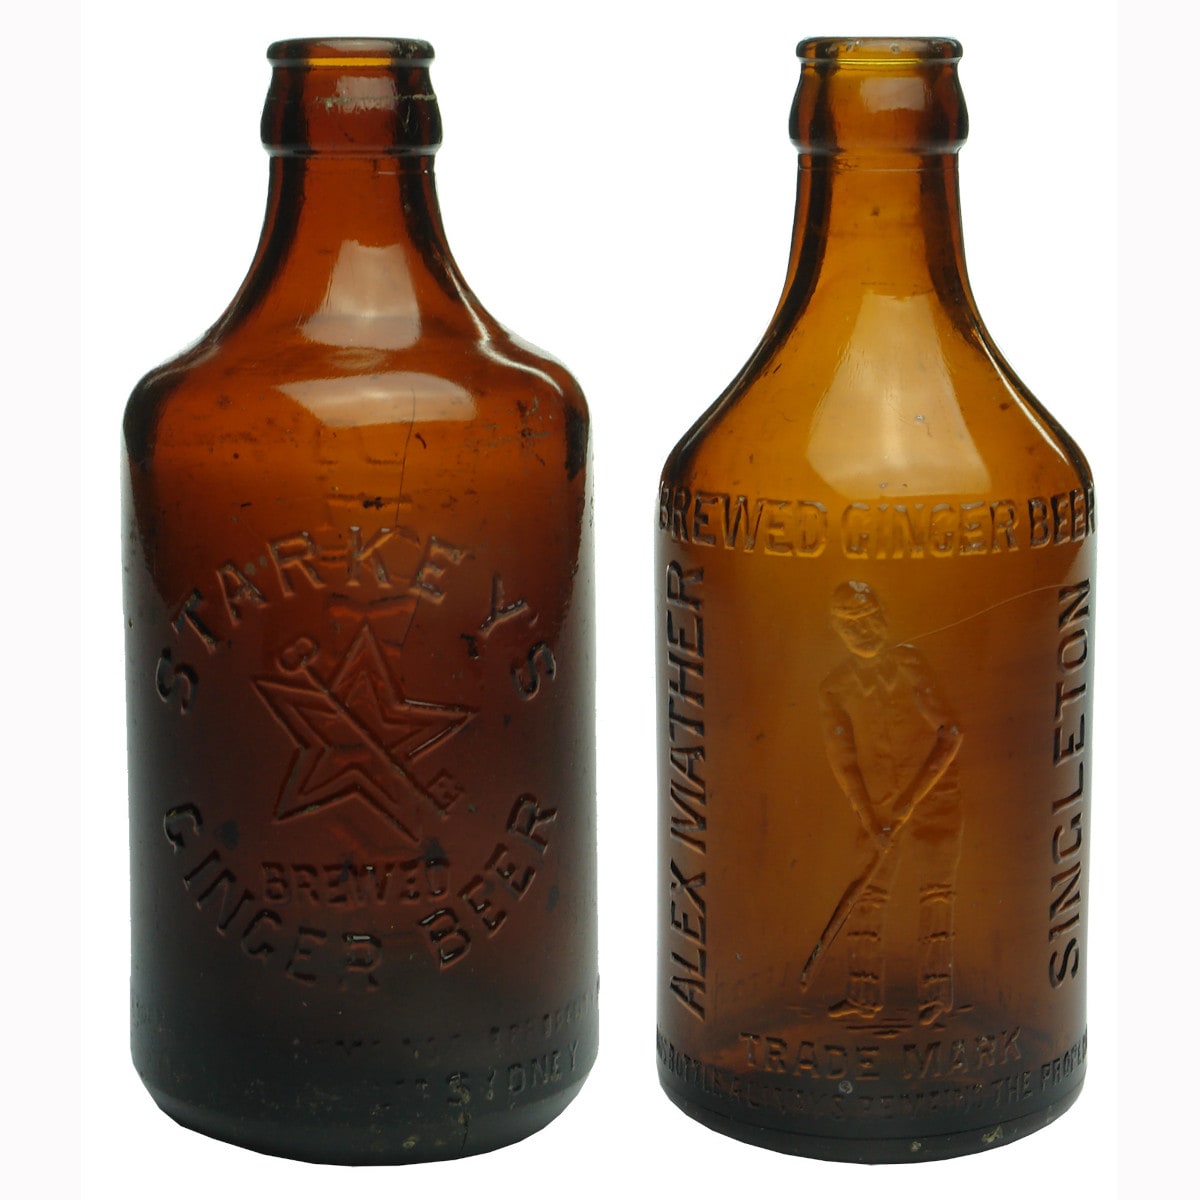 Pair of Amber Glass Ginger Beers: Starkey, Sydney and Mather, Singleton.